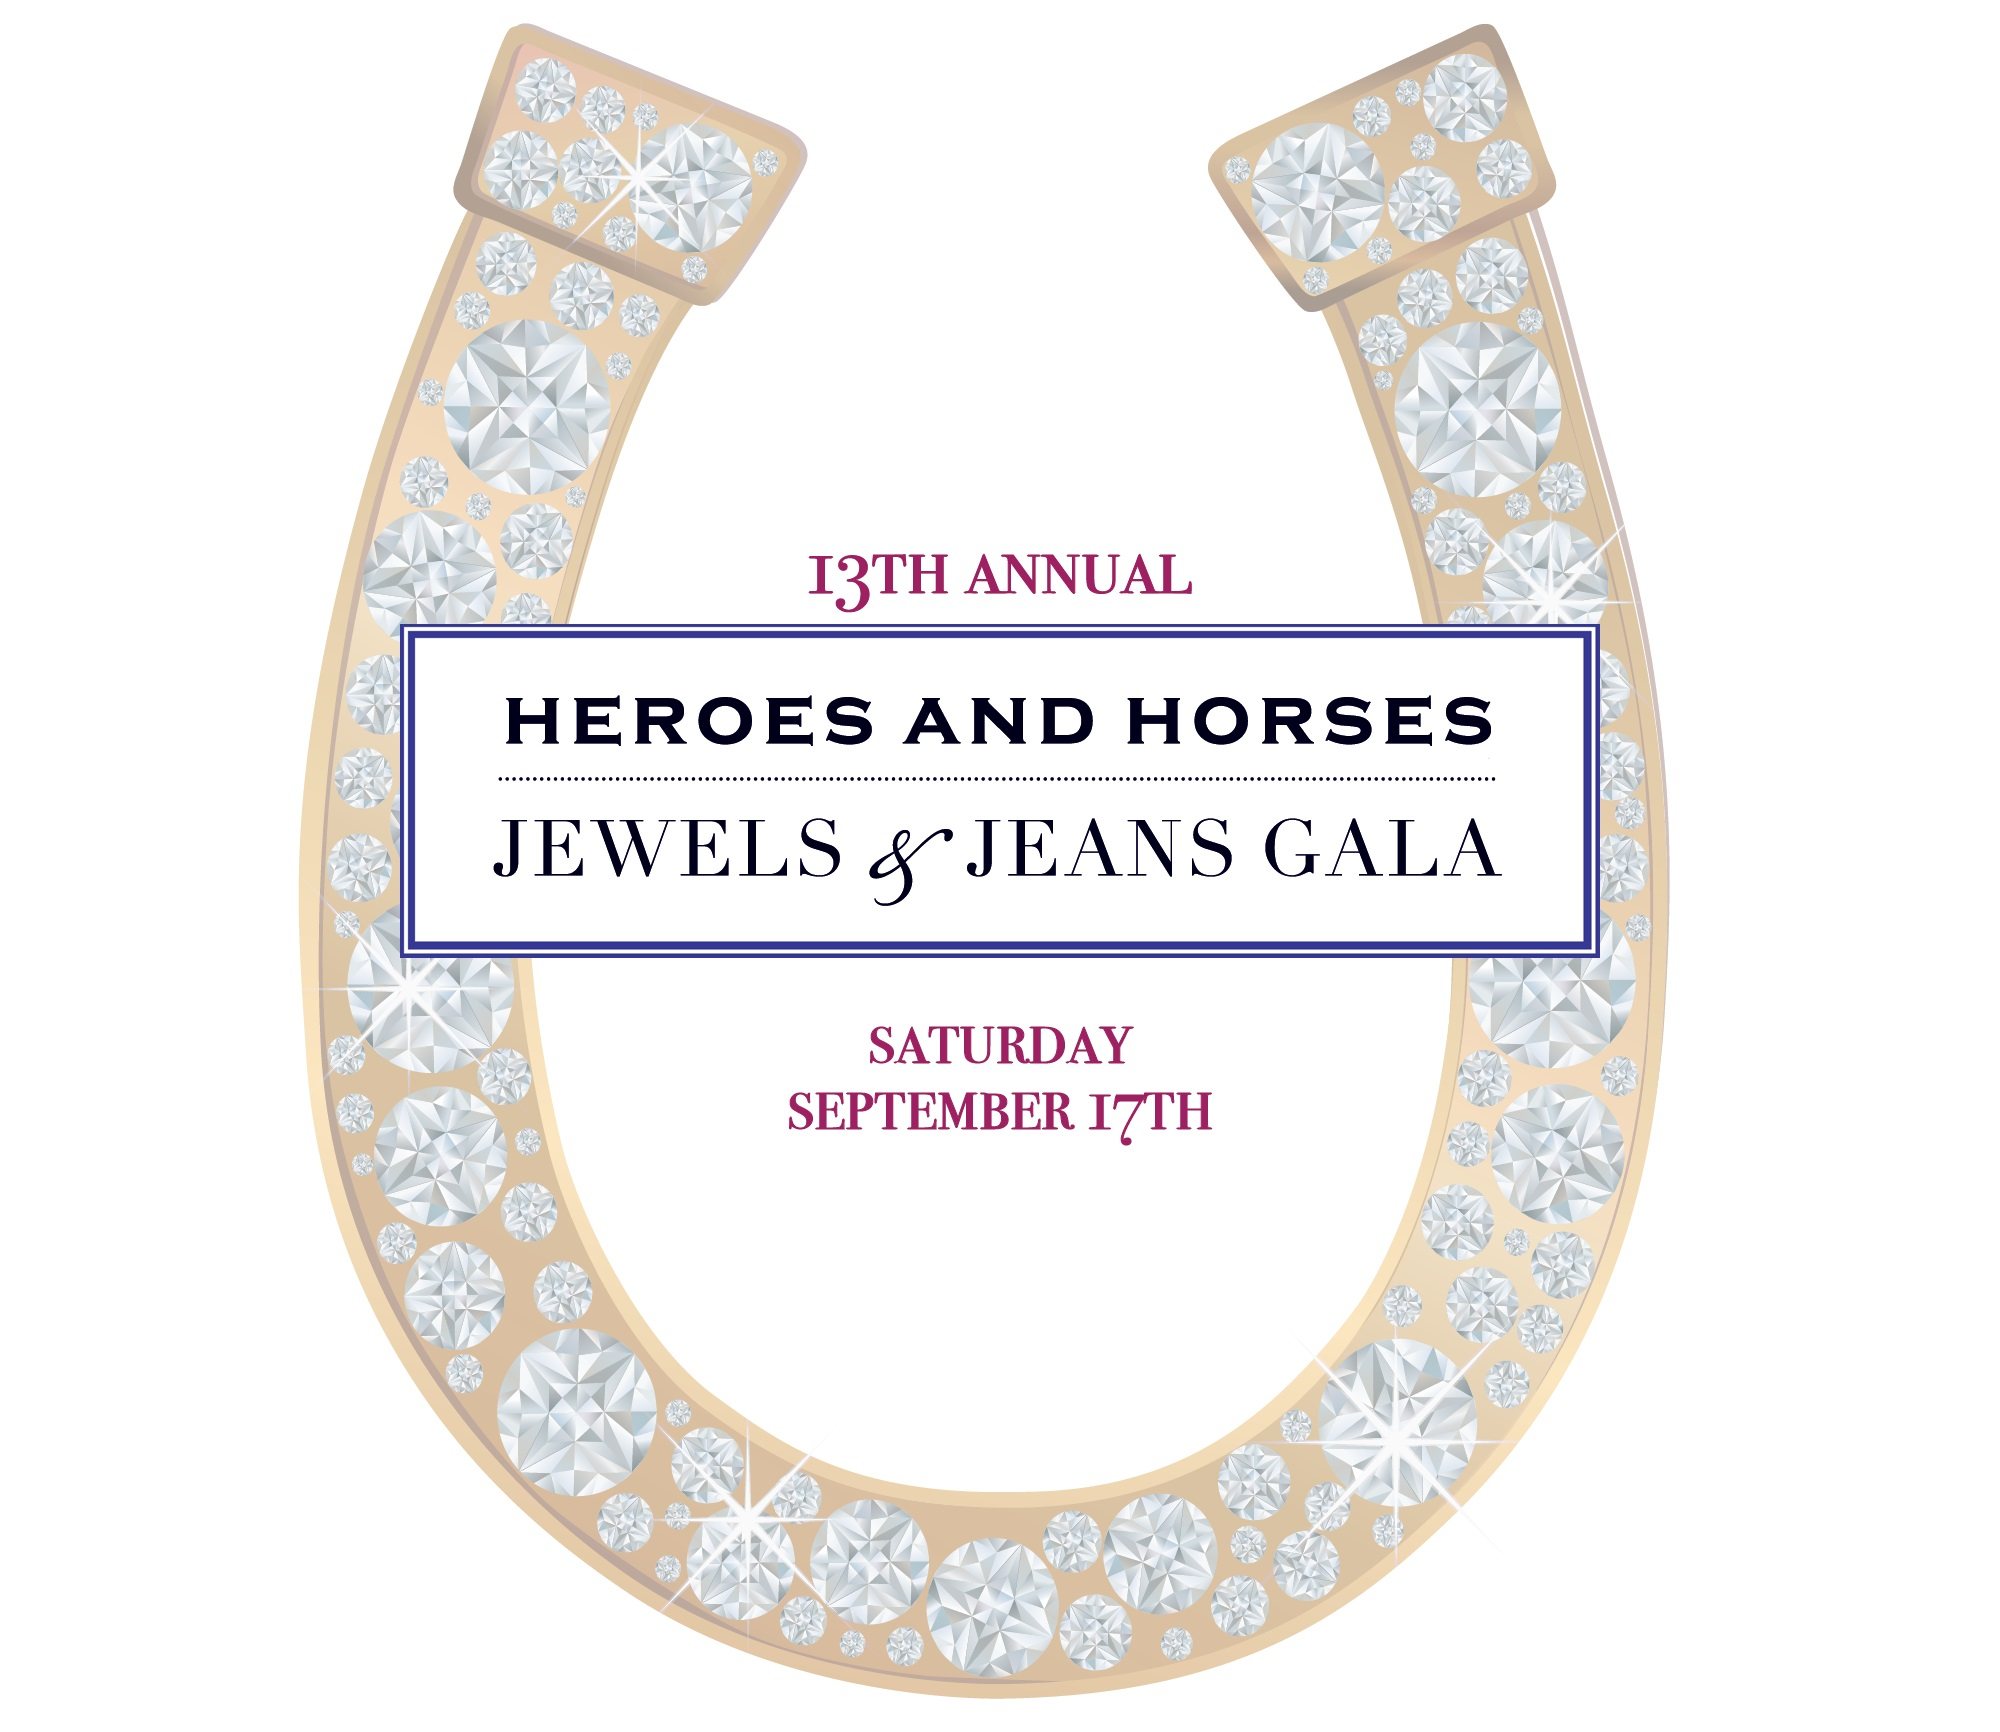 8-extraordinary-facts-about-heroes-and-horses-gala